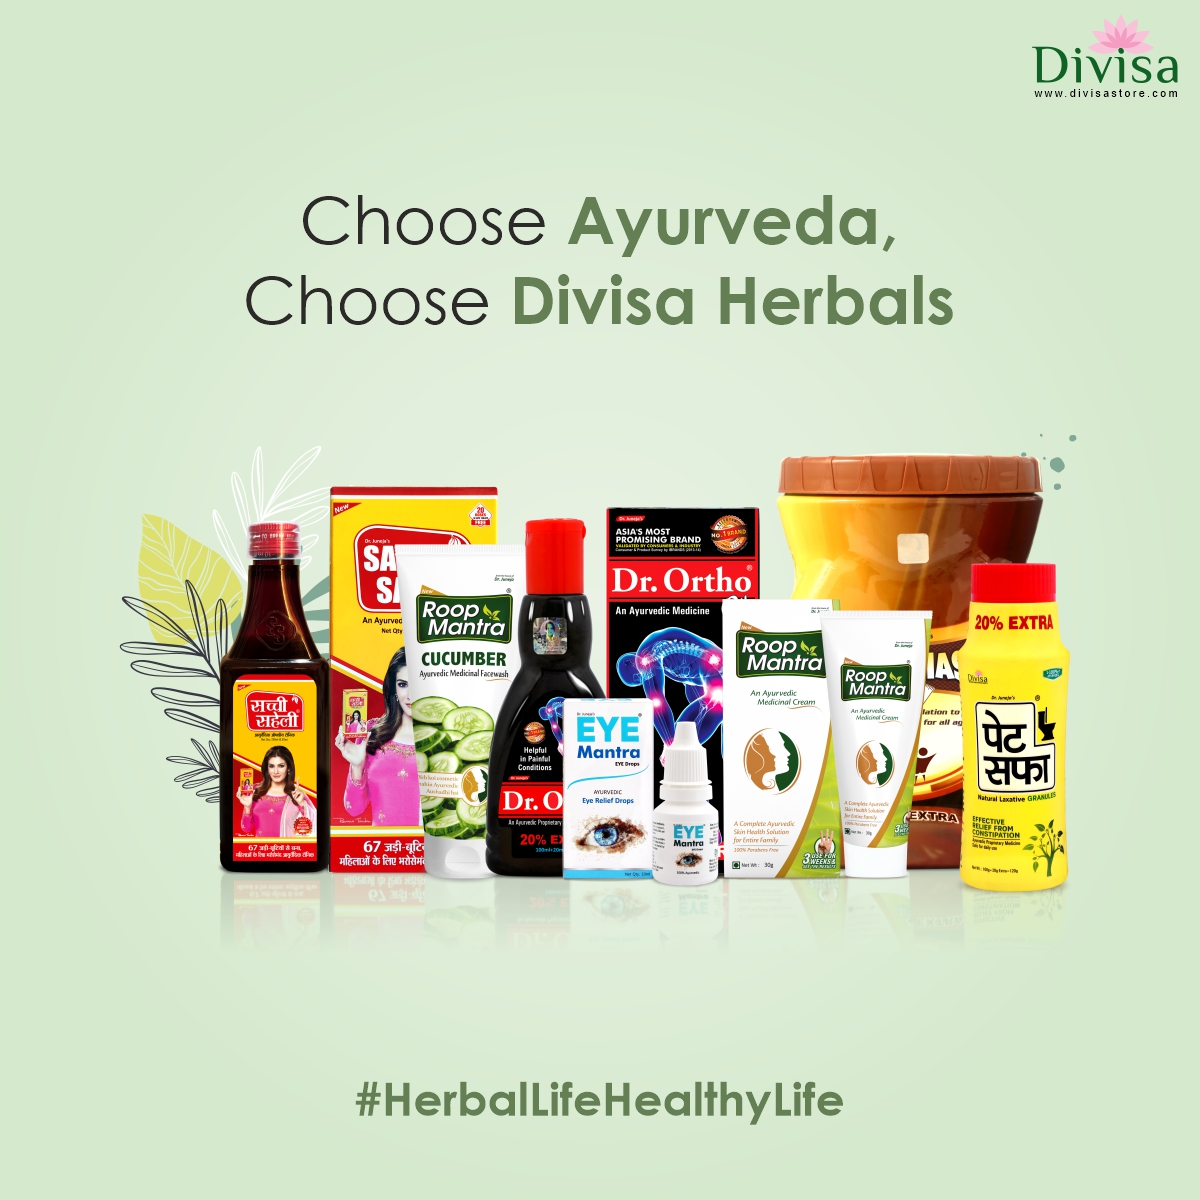 Looking for Ayurvedic products that are top in quality but budget-friendly at the same time? Then Divisa Herbals has the solution for you.
#DivisaStore #ayurvedicproducts #healthybody #ayurveda #skincare #HerbalLifeHappyLife #fitness #jointcare #constipationrelief